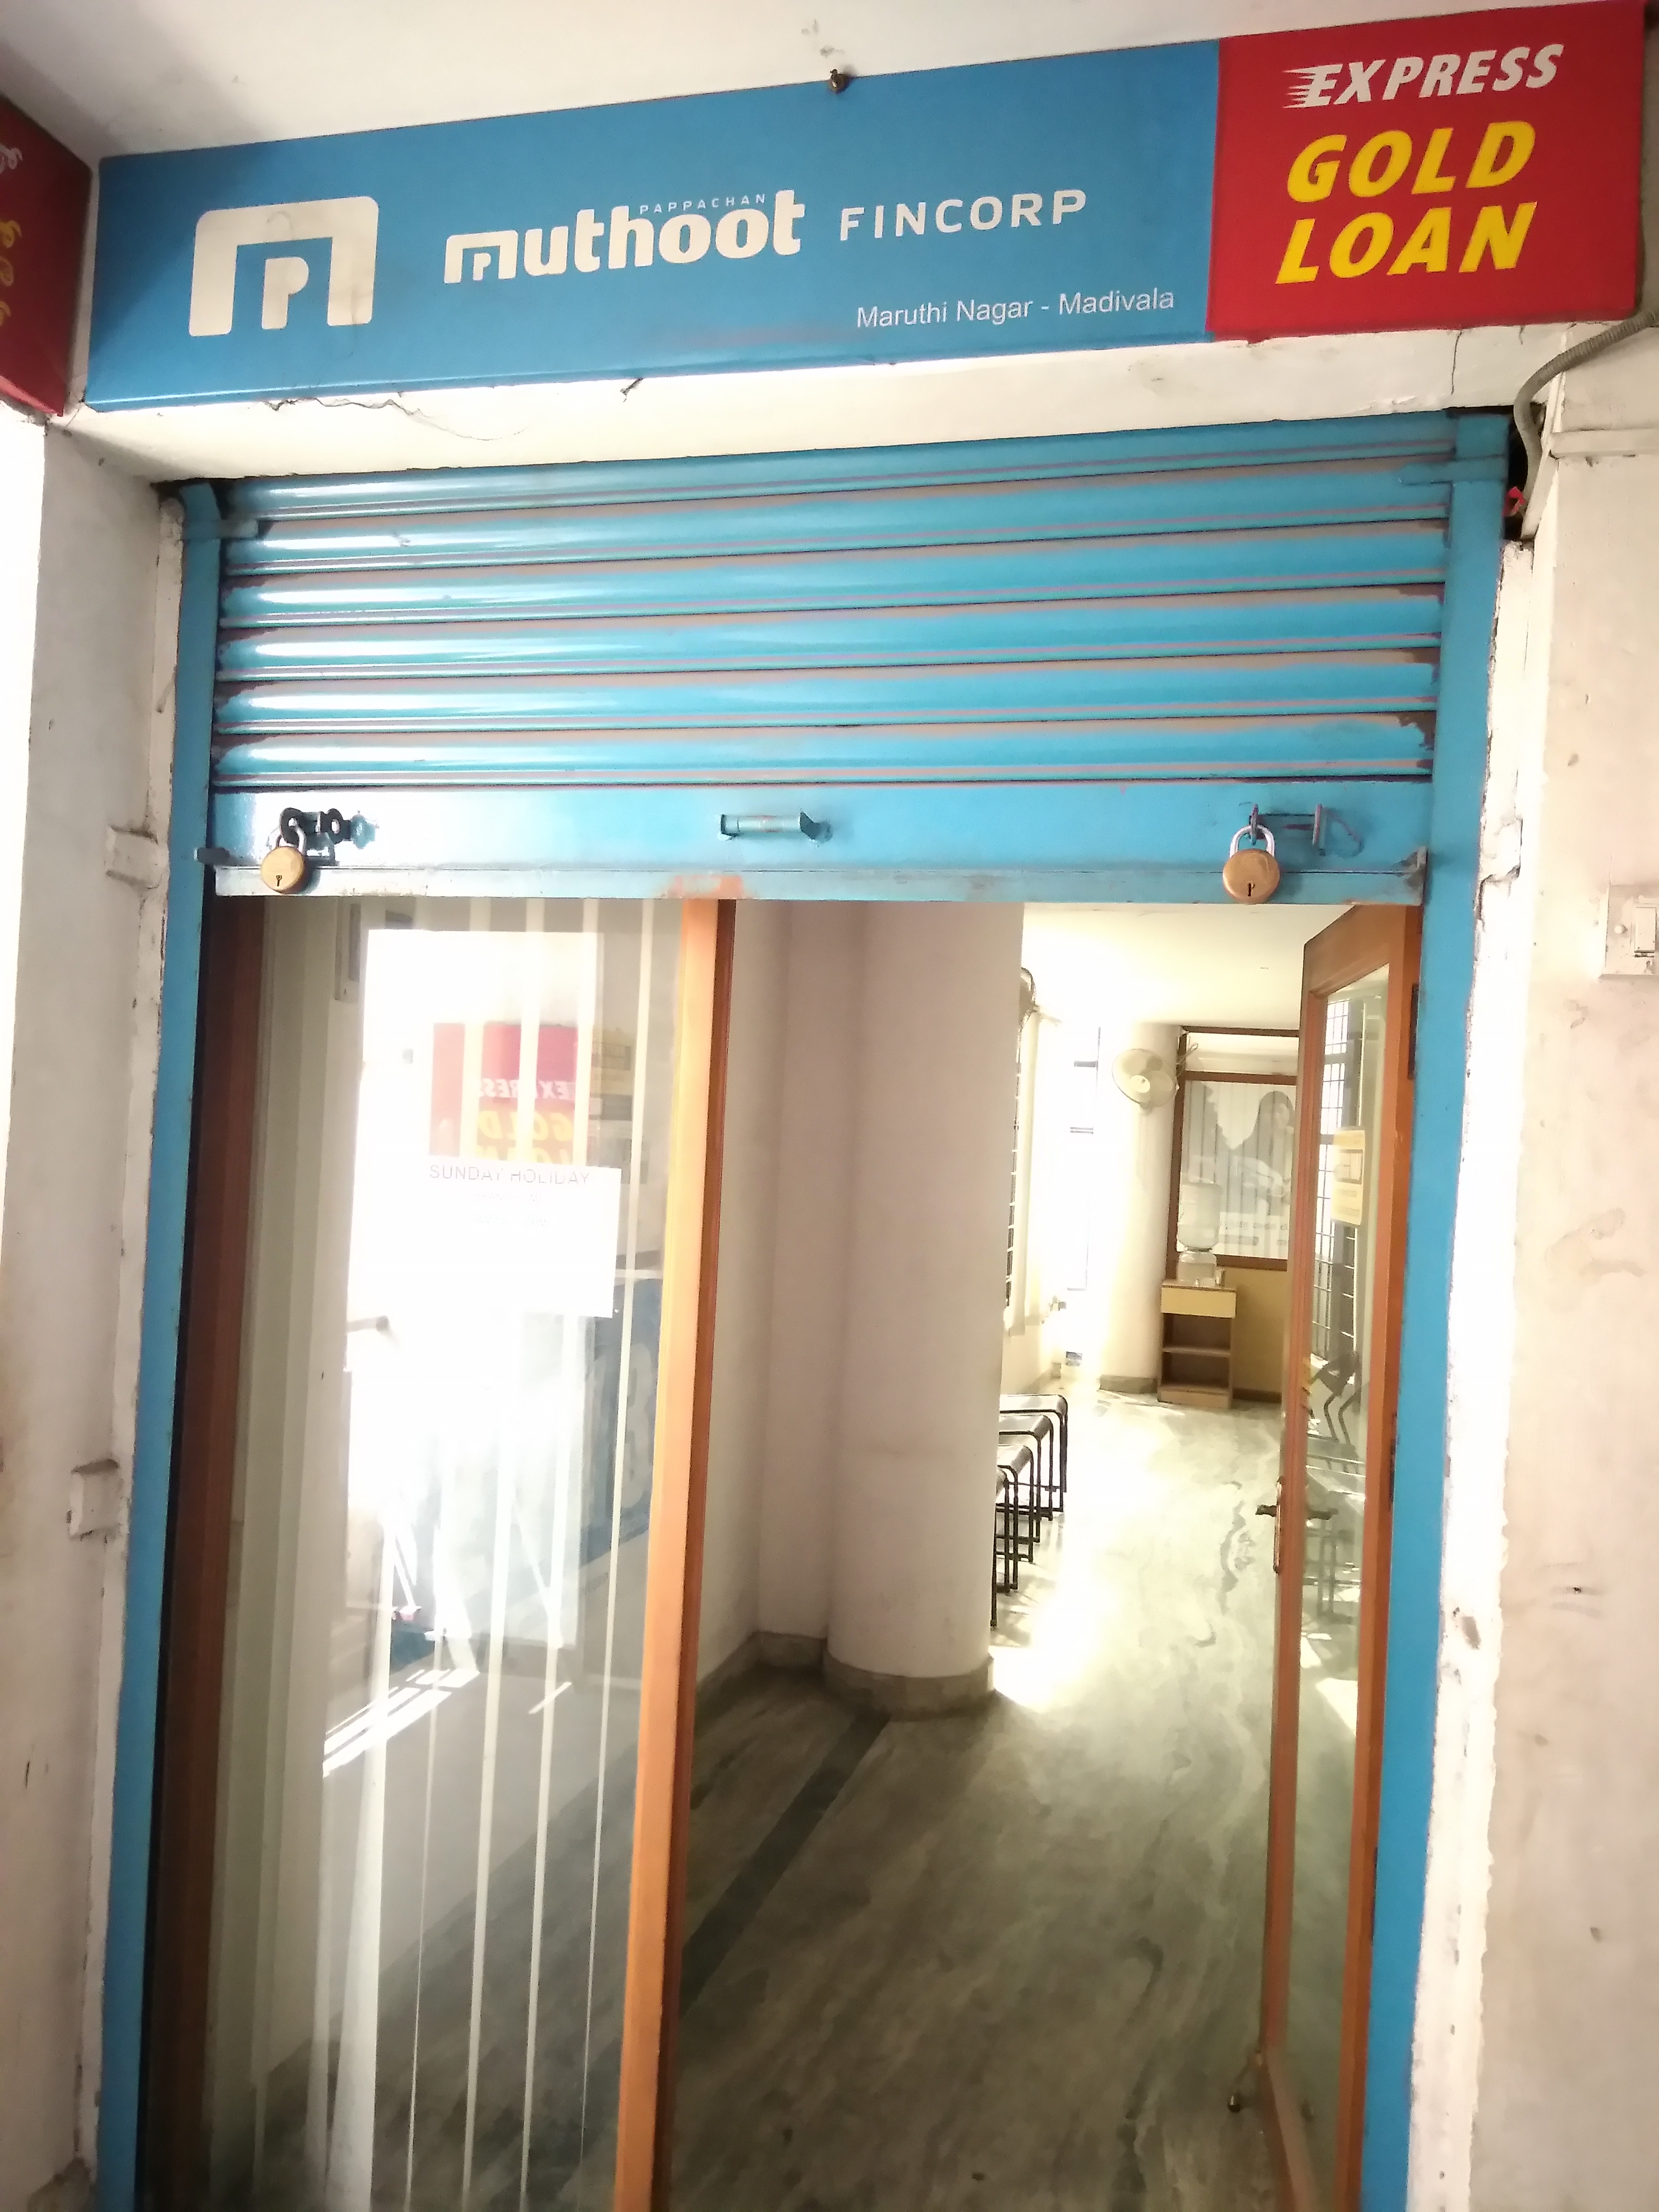 Photos and Videos of Muthoot Fincorp Gold Loan in Madiwala, Bangalore